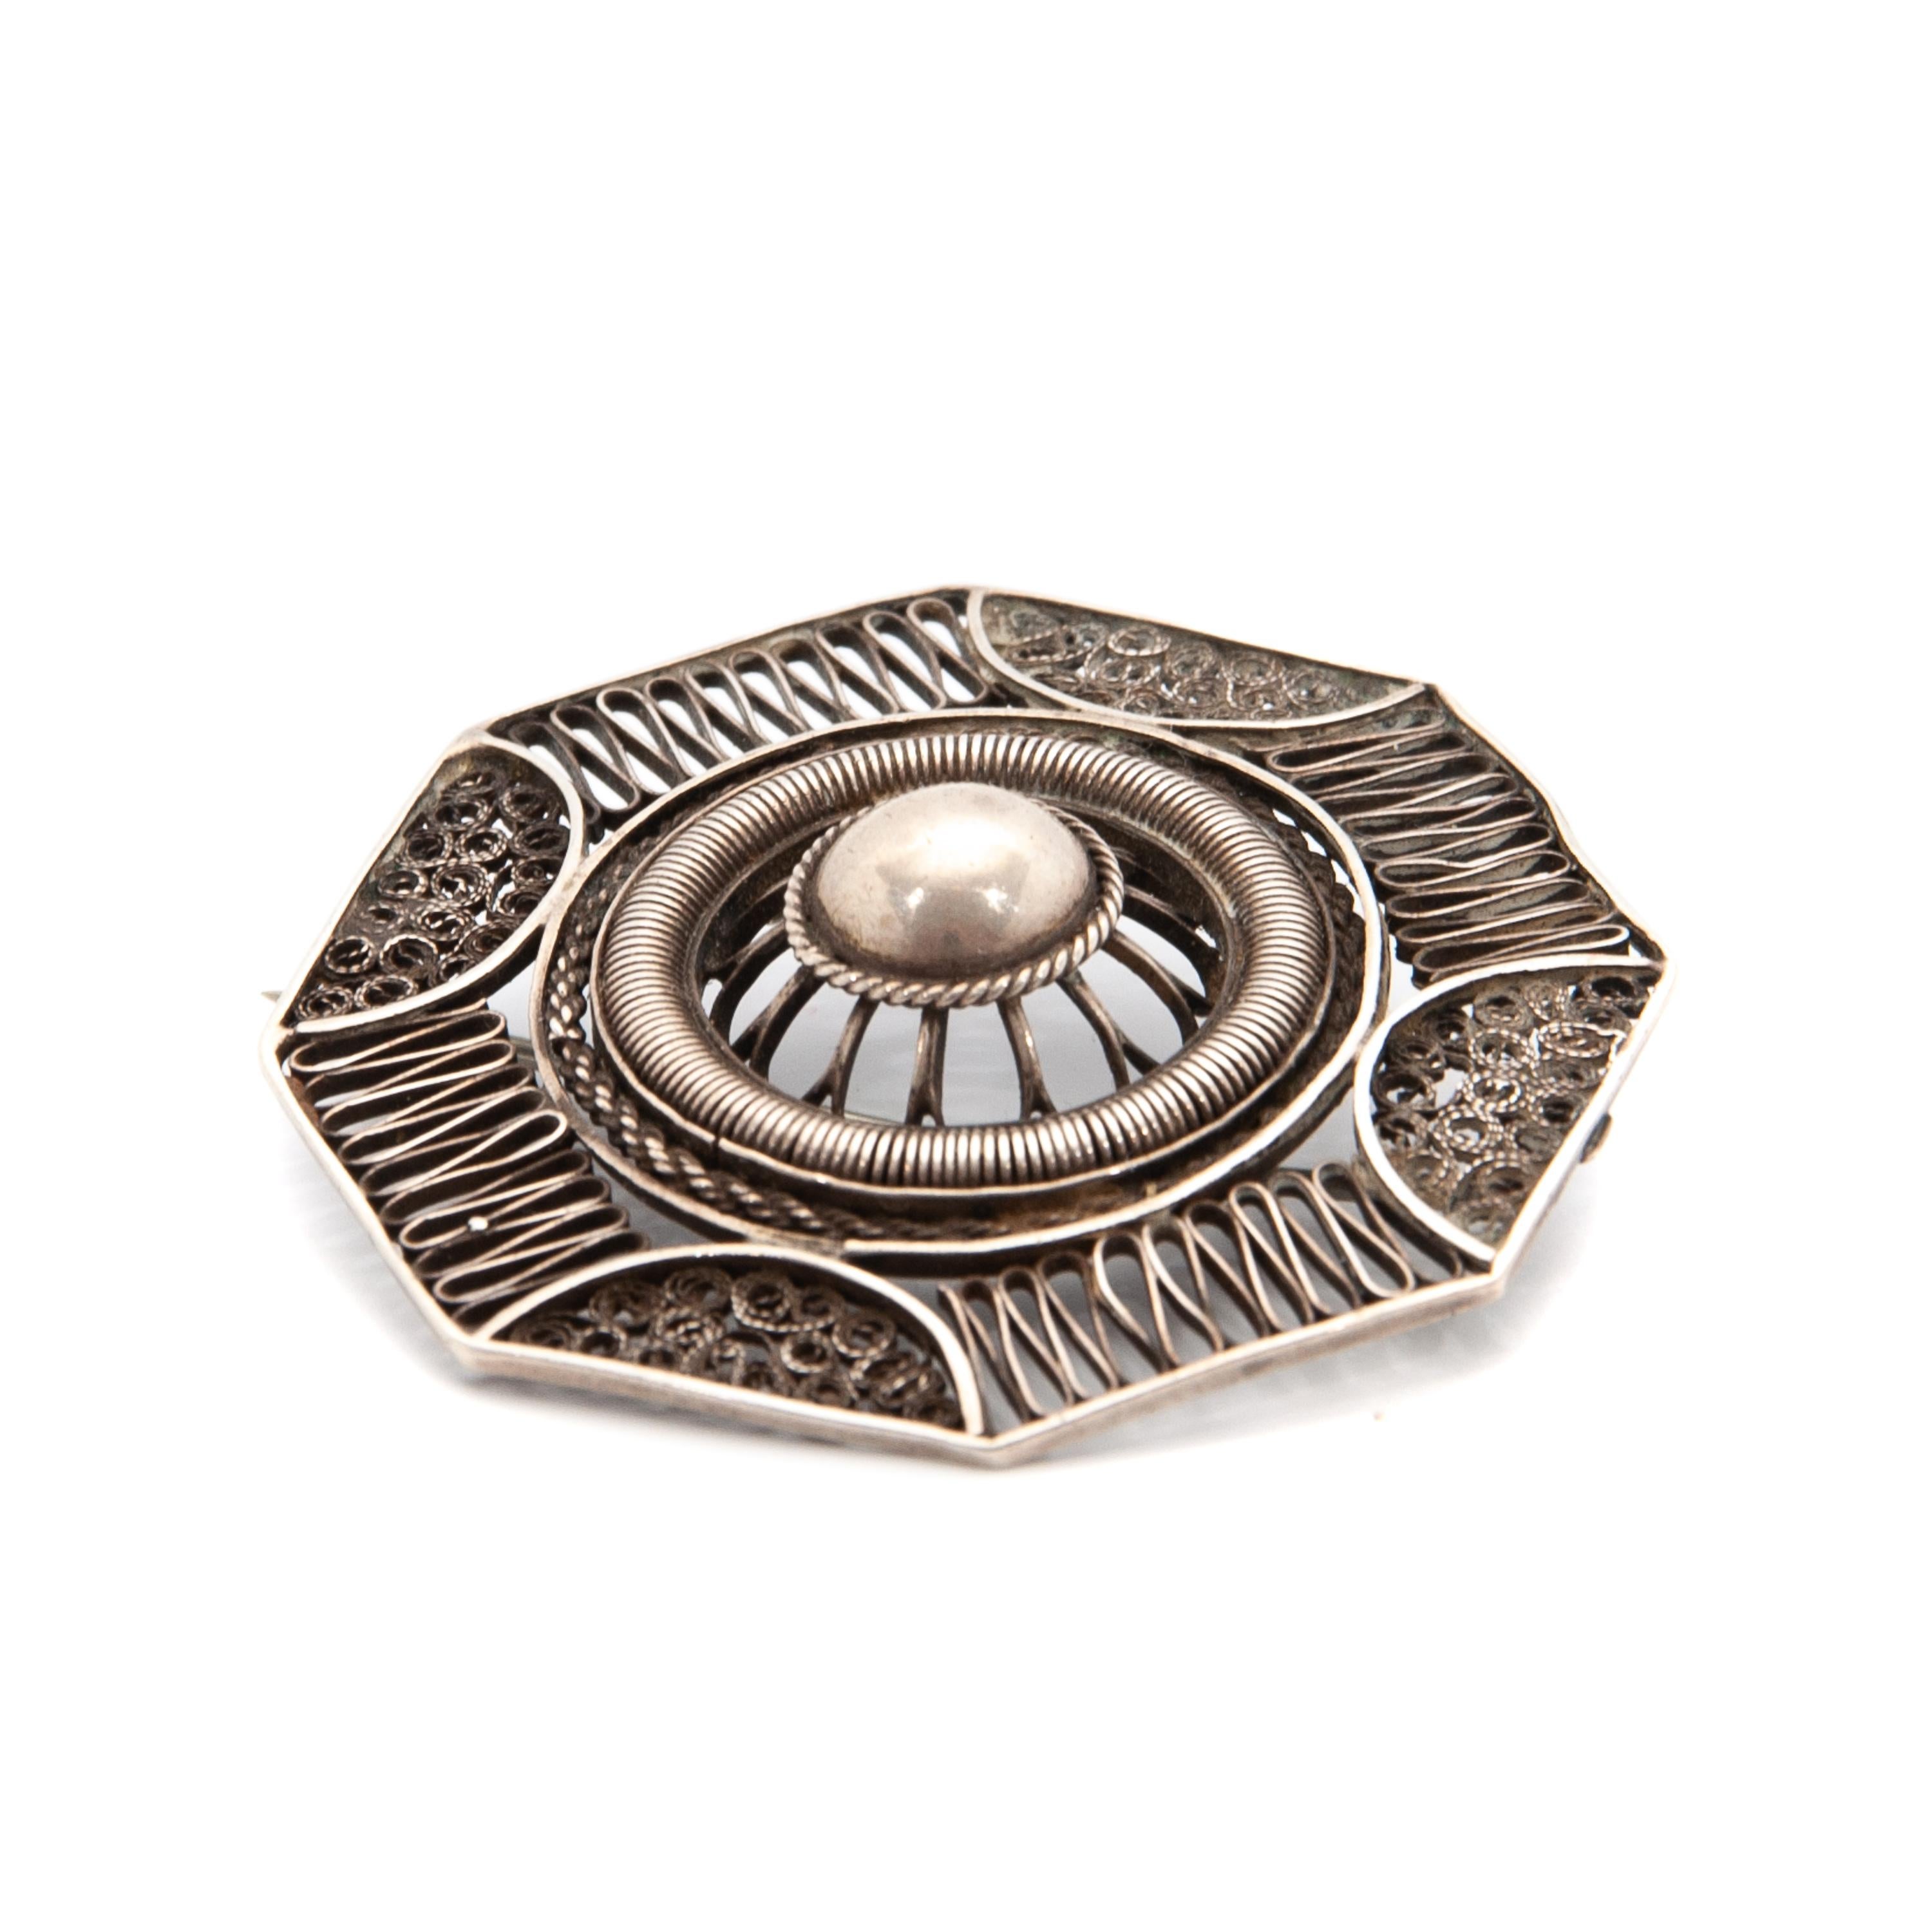 This beauty is searching for a new home! Maybe with you, or to give as a gift to your loved one?! 
Please visit our 1stDibs Heztia Storefront to discover more of our collection.

Vintage silver brooch which is finely crafted with cannetille and